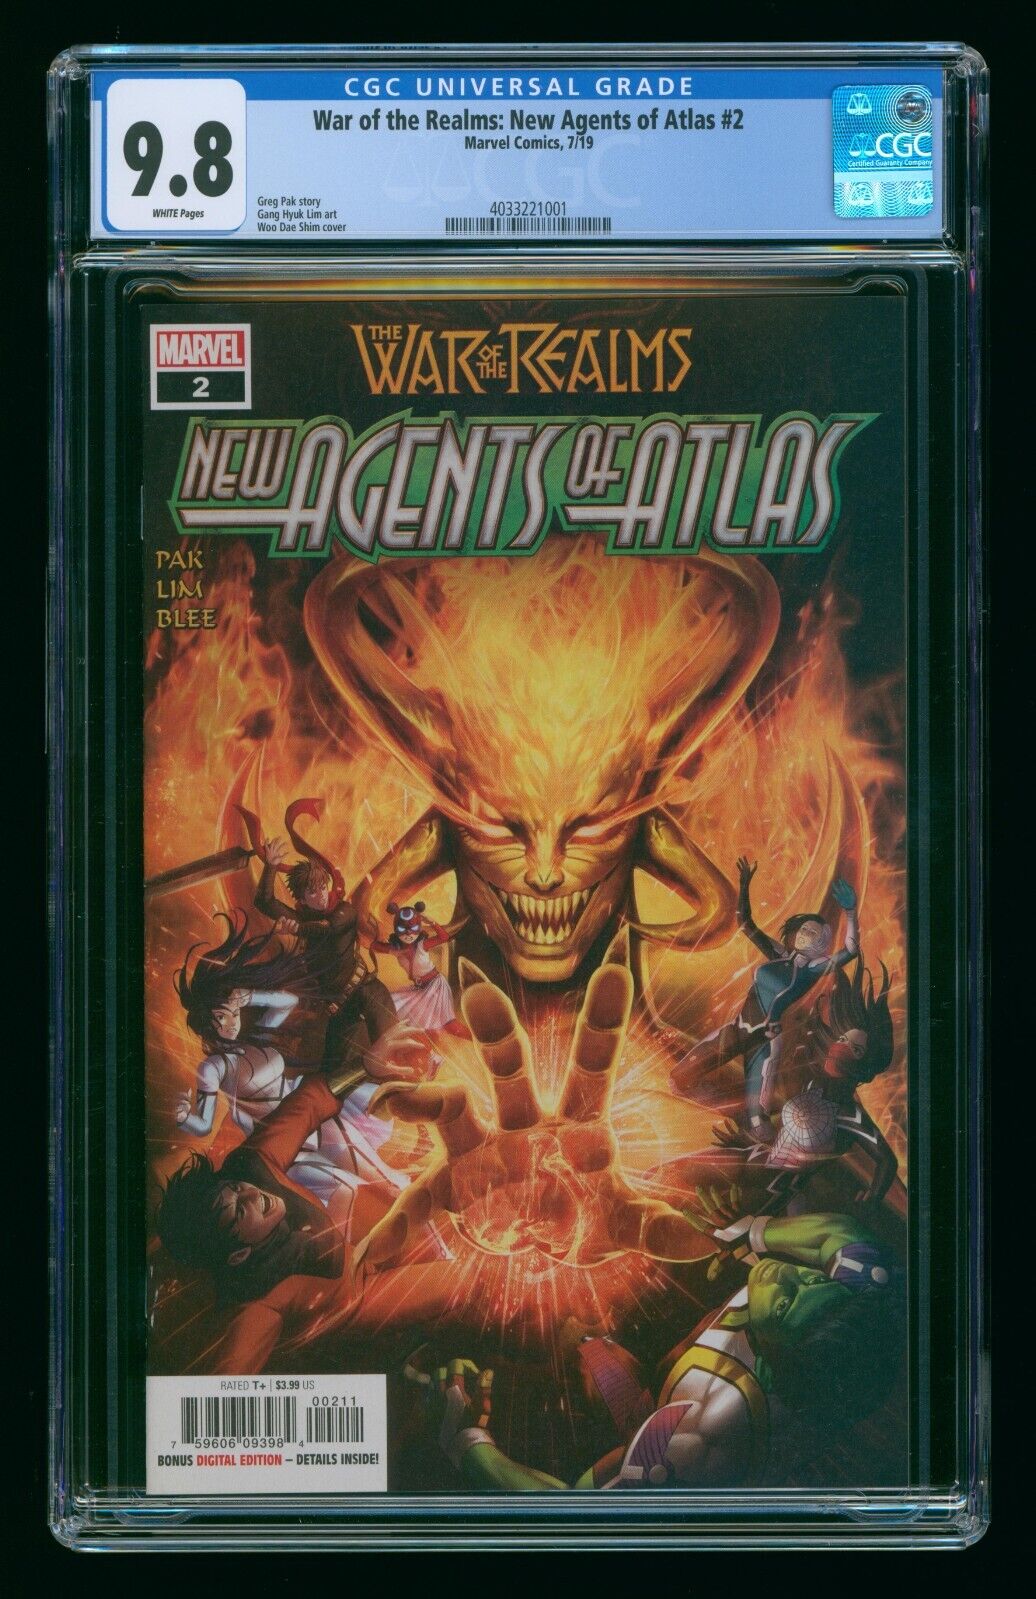 WAR OF THE REALMS NEW AGE OF ATLAS #2 (2019) CGC 9.8 1st SWORD MASTER